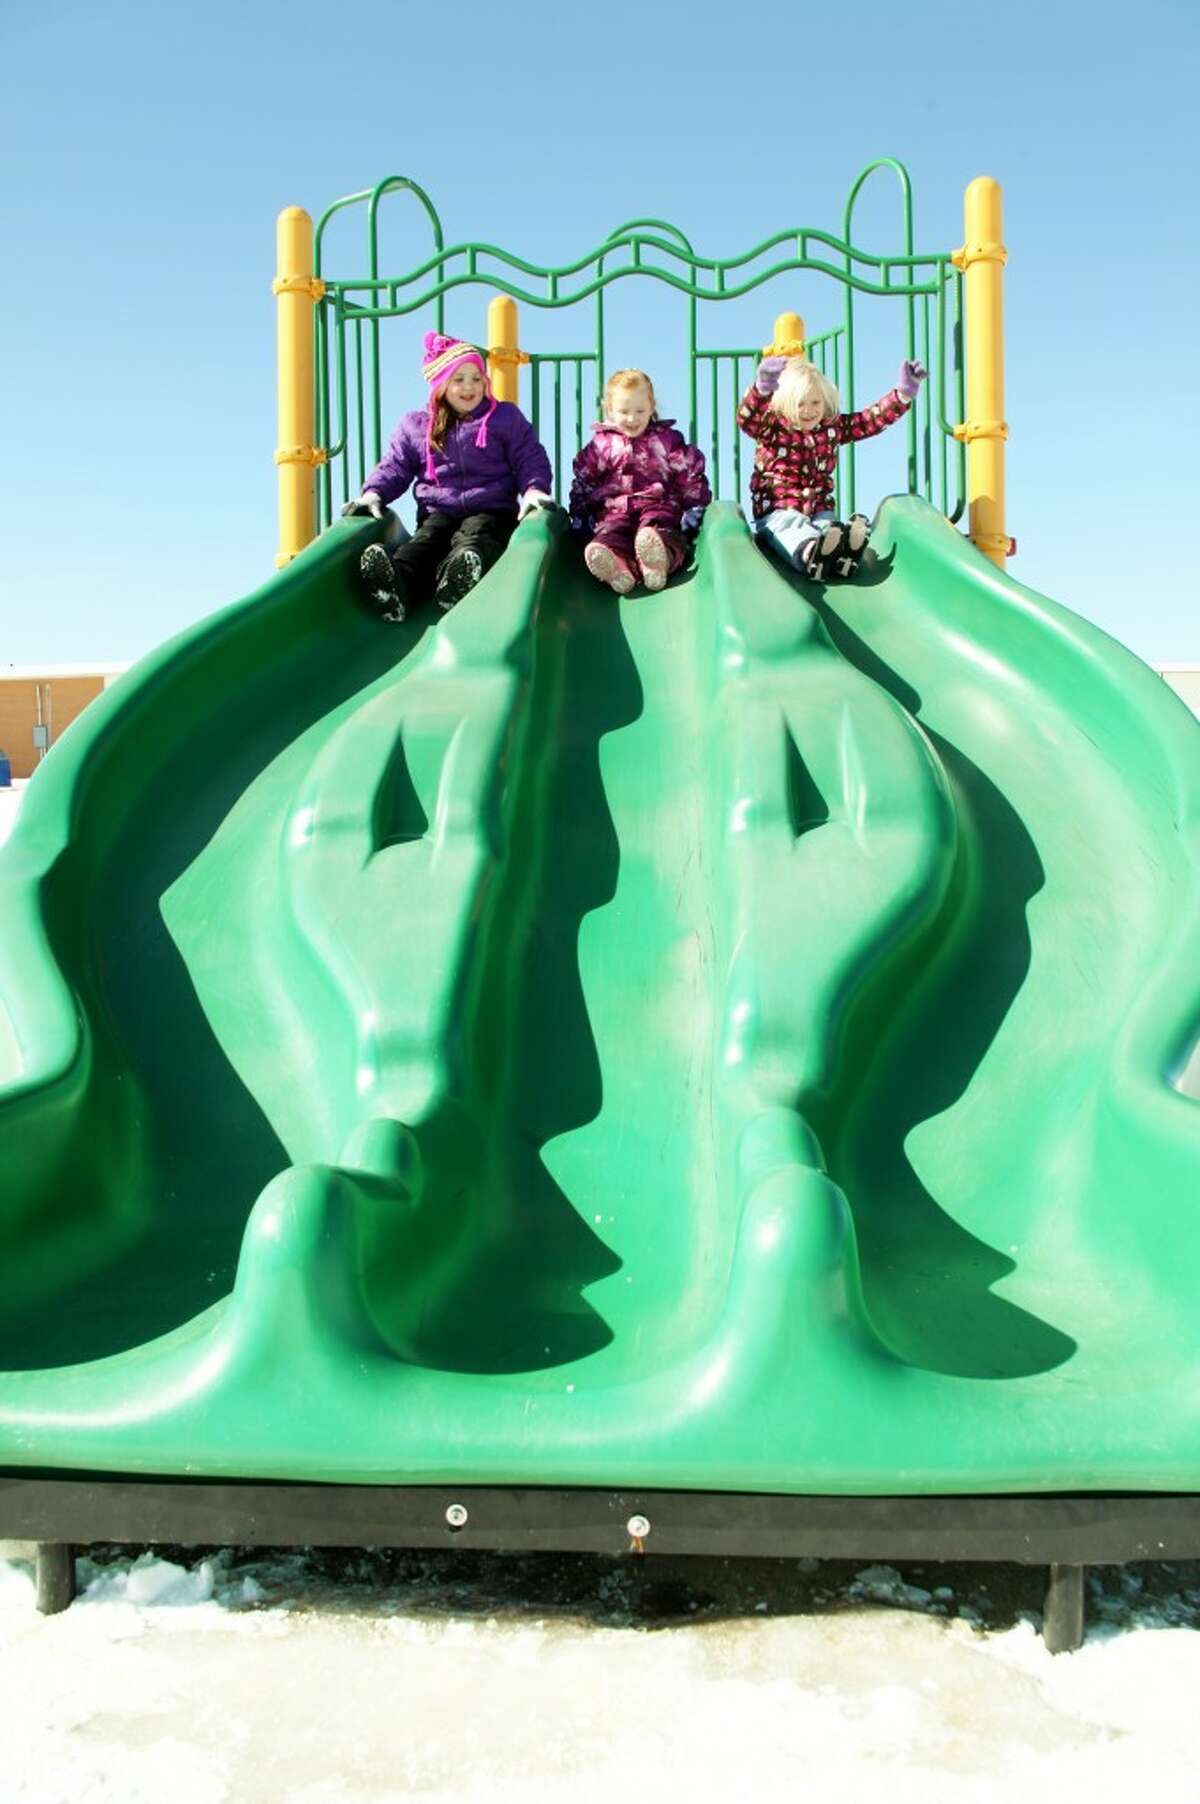 SOCIAL SKILLS: MSES students prepare to go down the slide. Recess offers students a chance to develop their social skills as they play together.